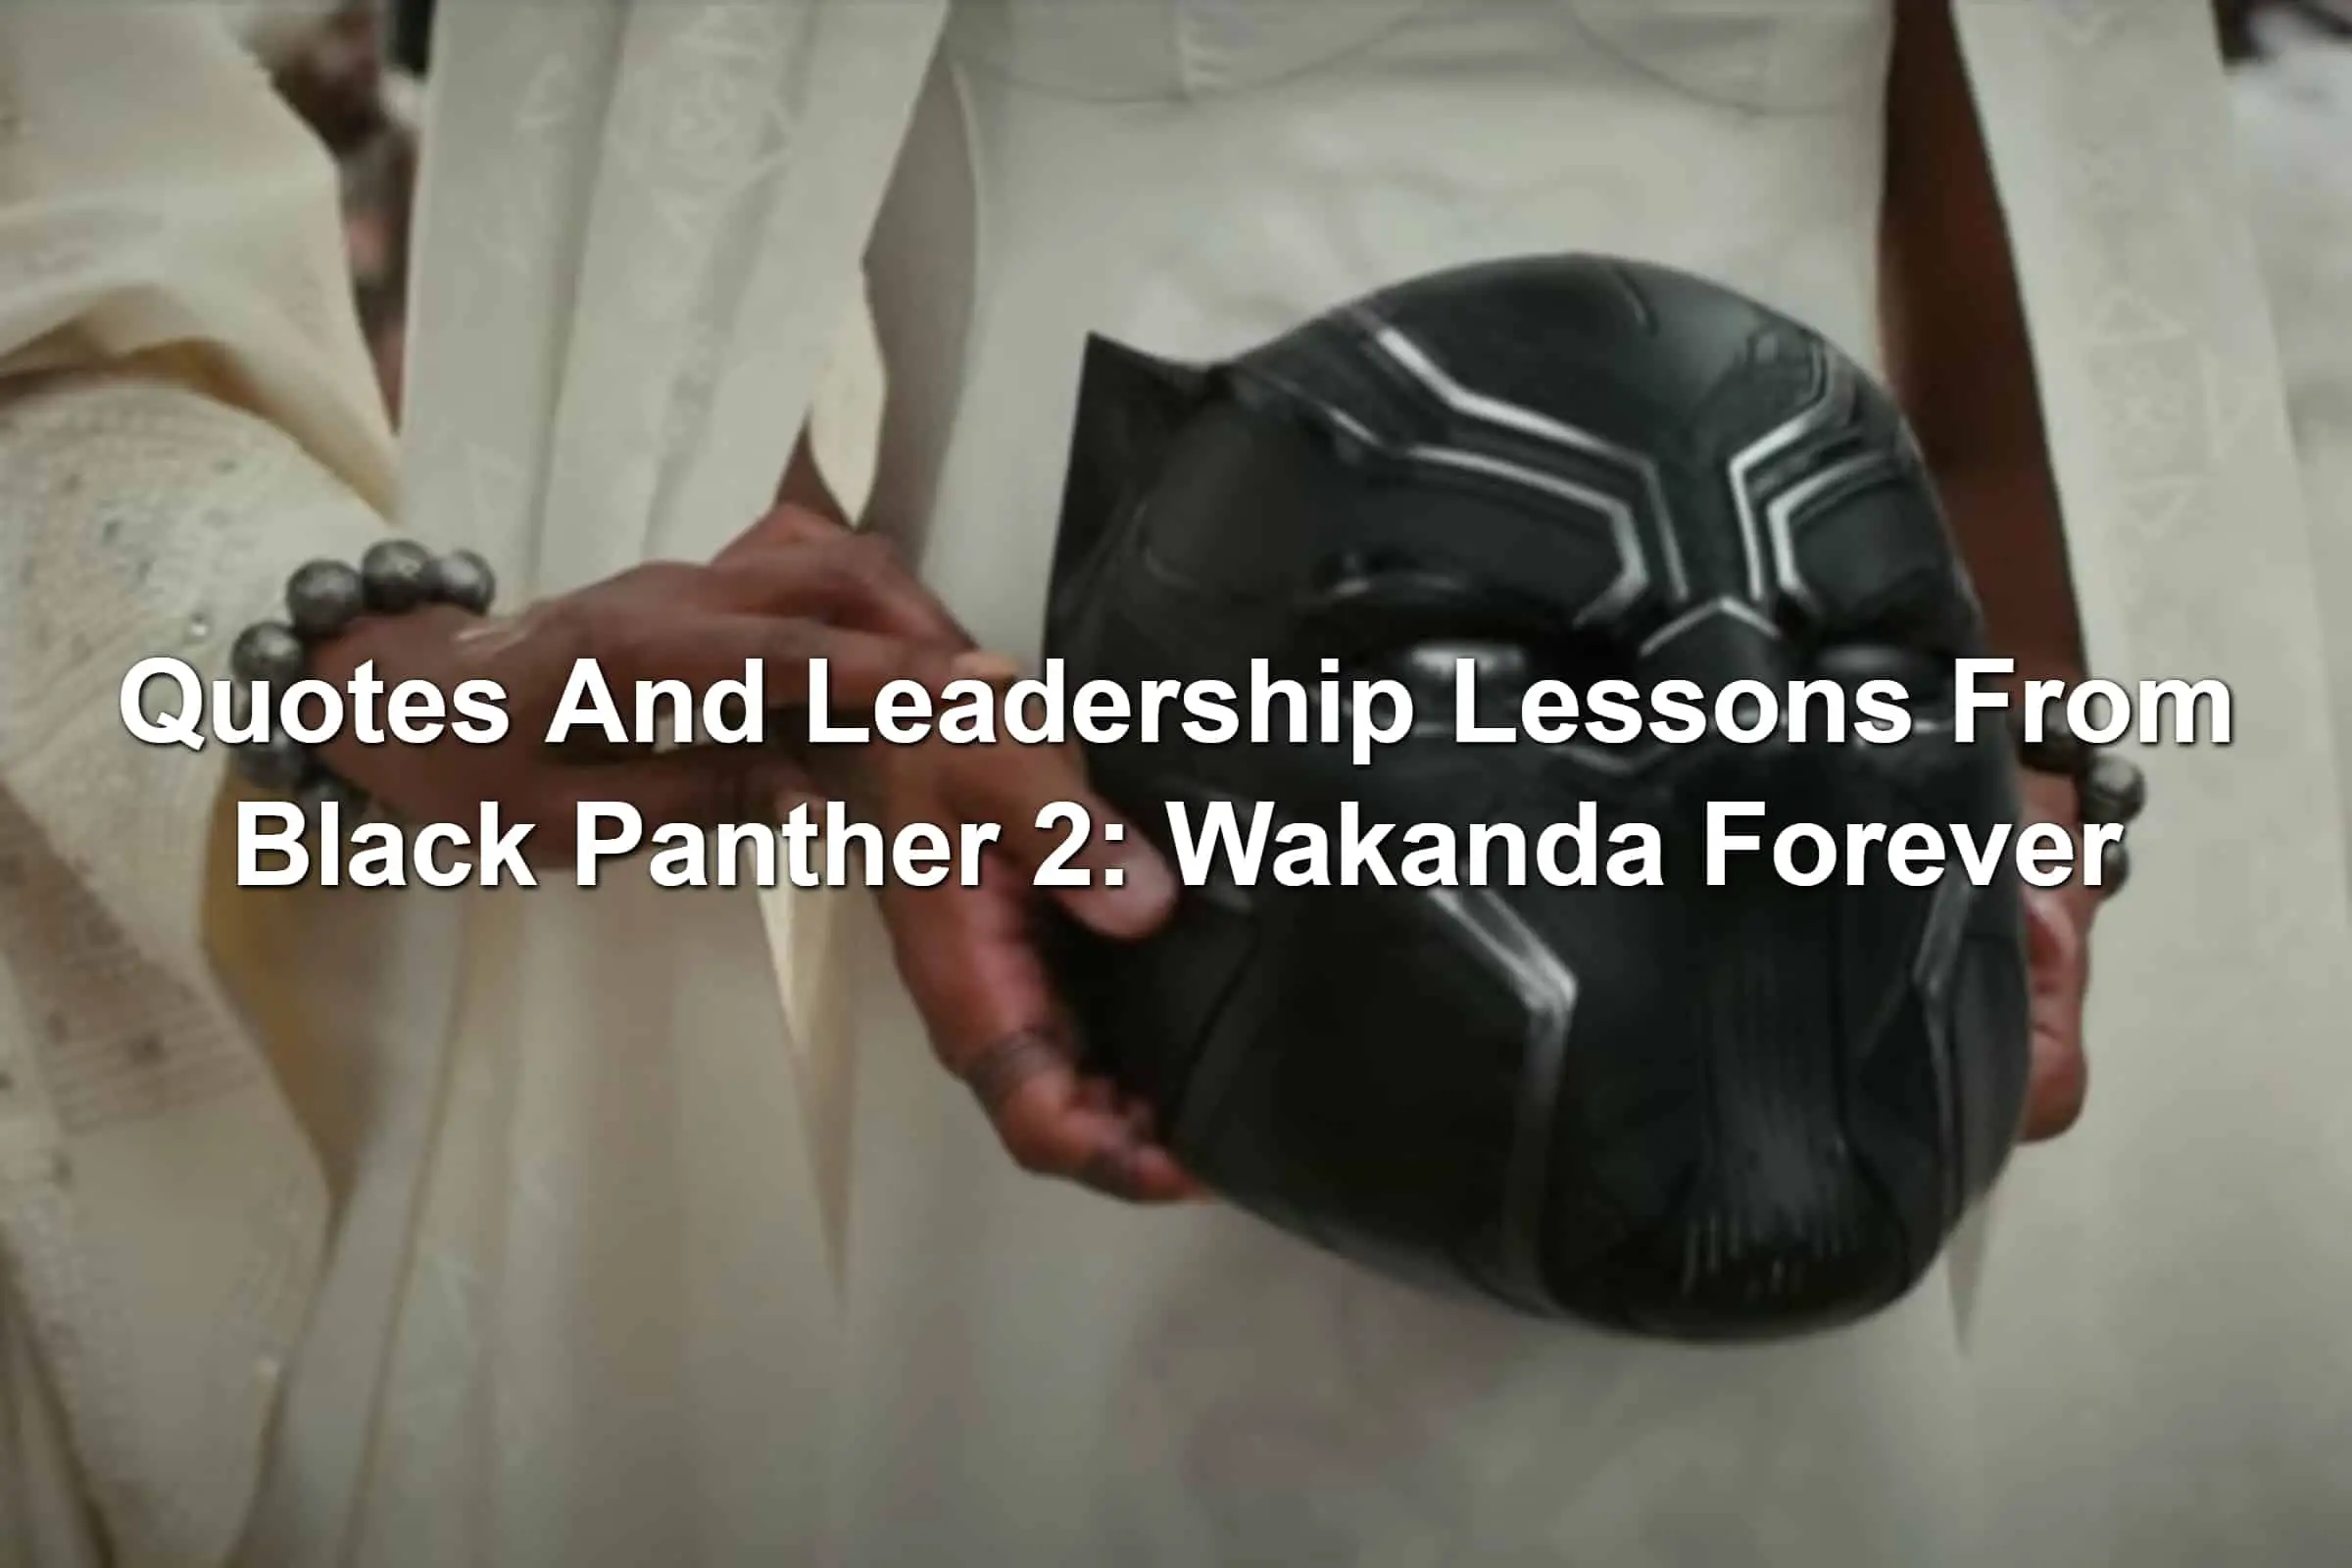 Queen Ramonda holding the Black Panther mask in Wakanda Forever